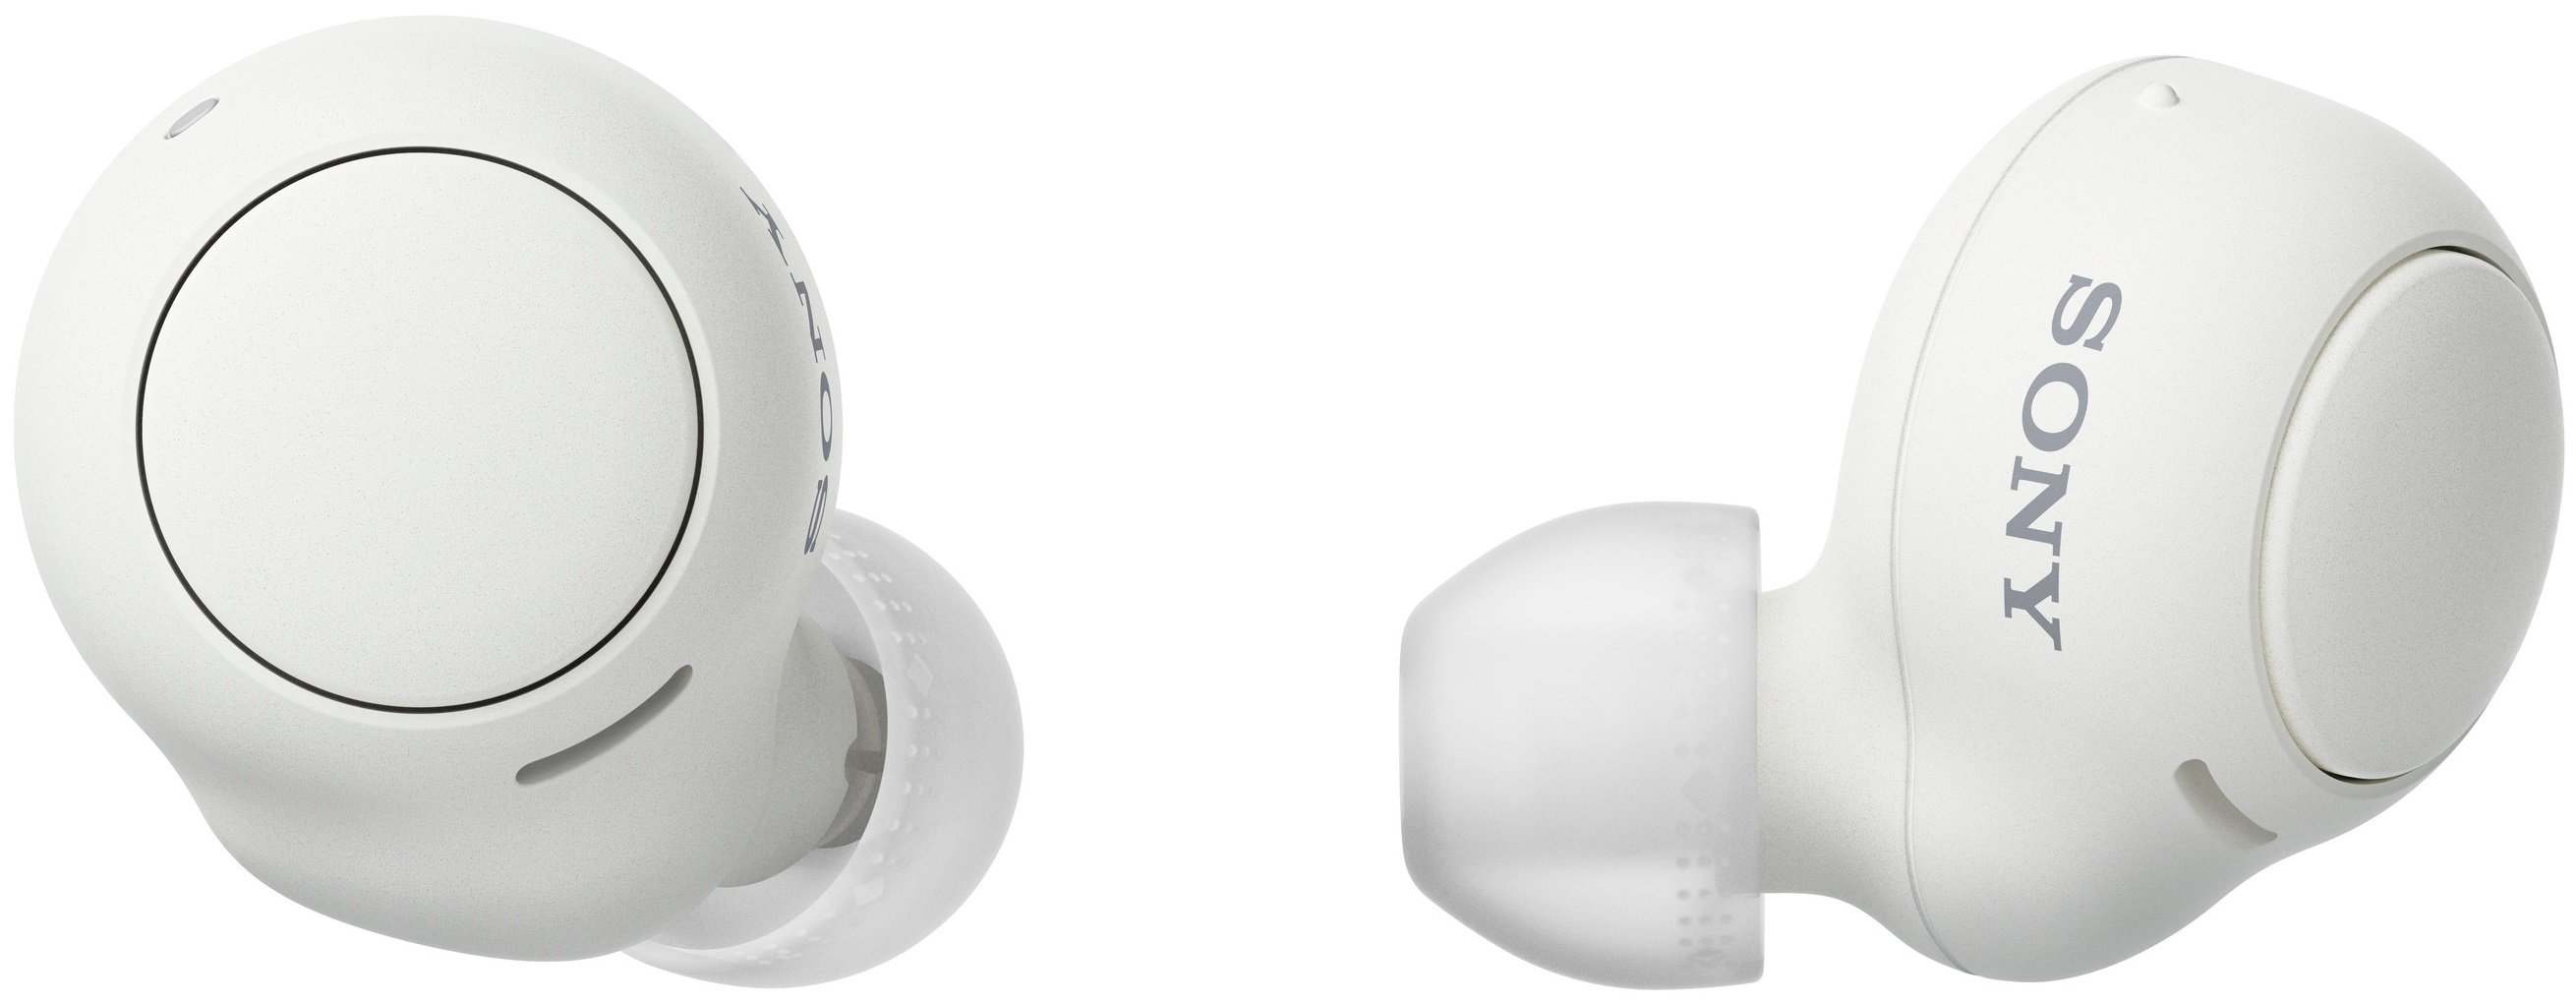 WIRELESS HEADPHONES SONY WFC500W. CE7,orig white,TWS KOPFHÖRER, IPX4, WEISS Batteries for phones, video cameras cases protecting glasses and other parts